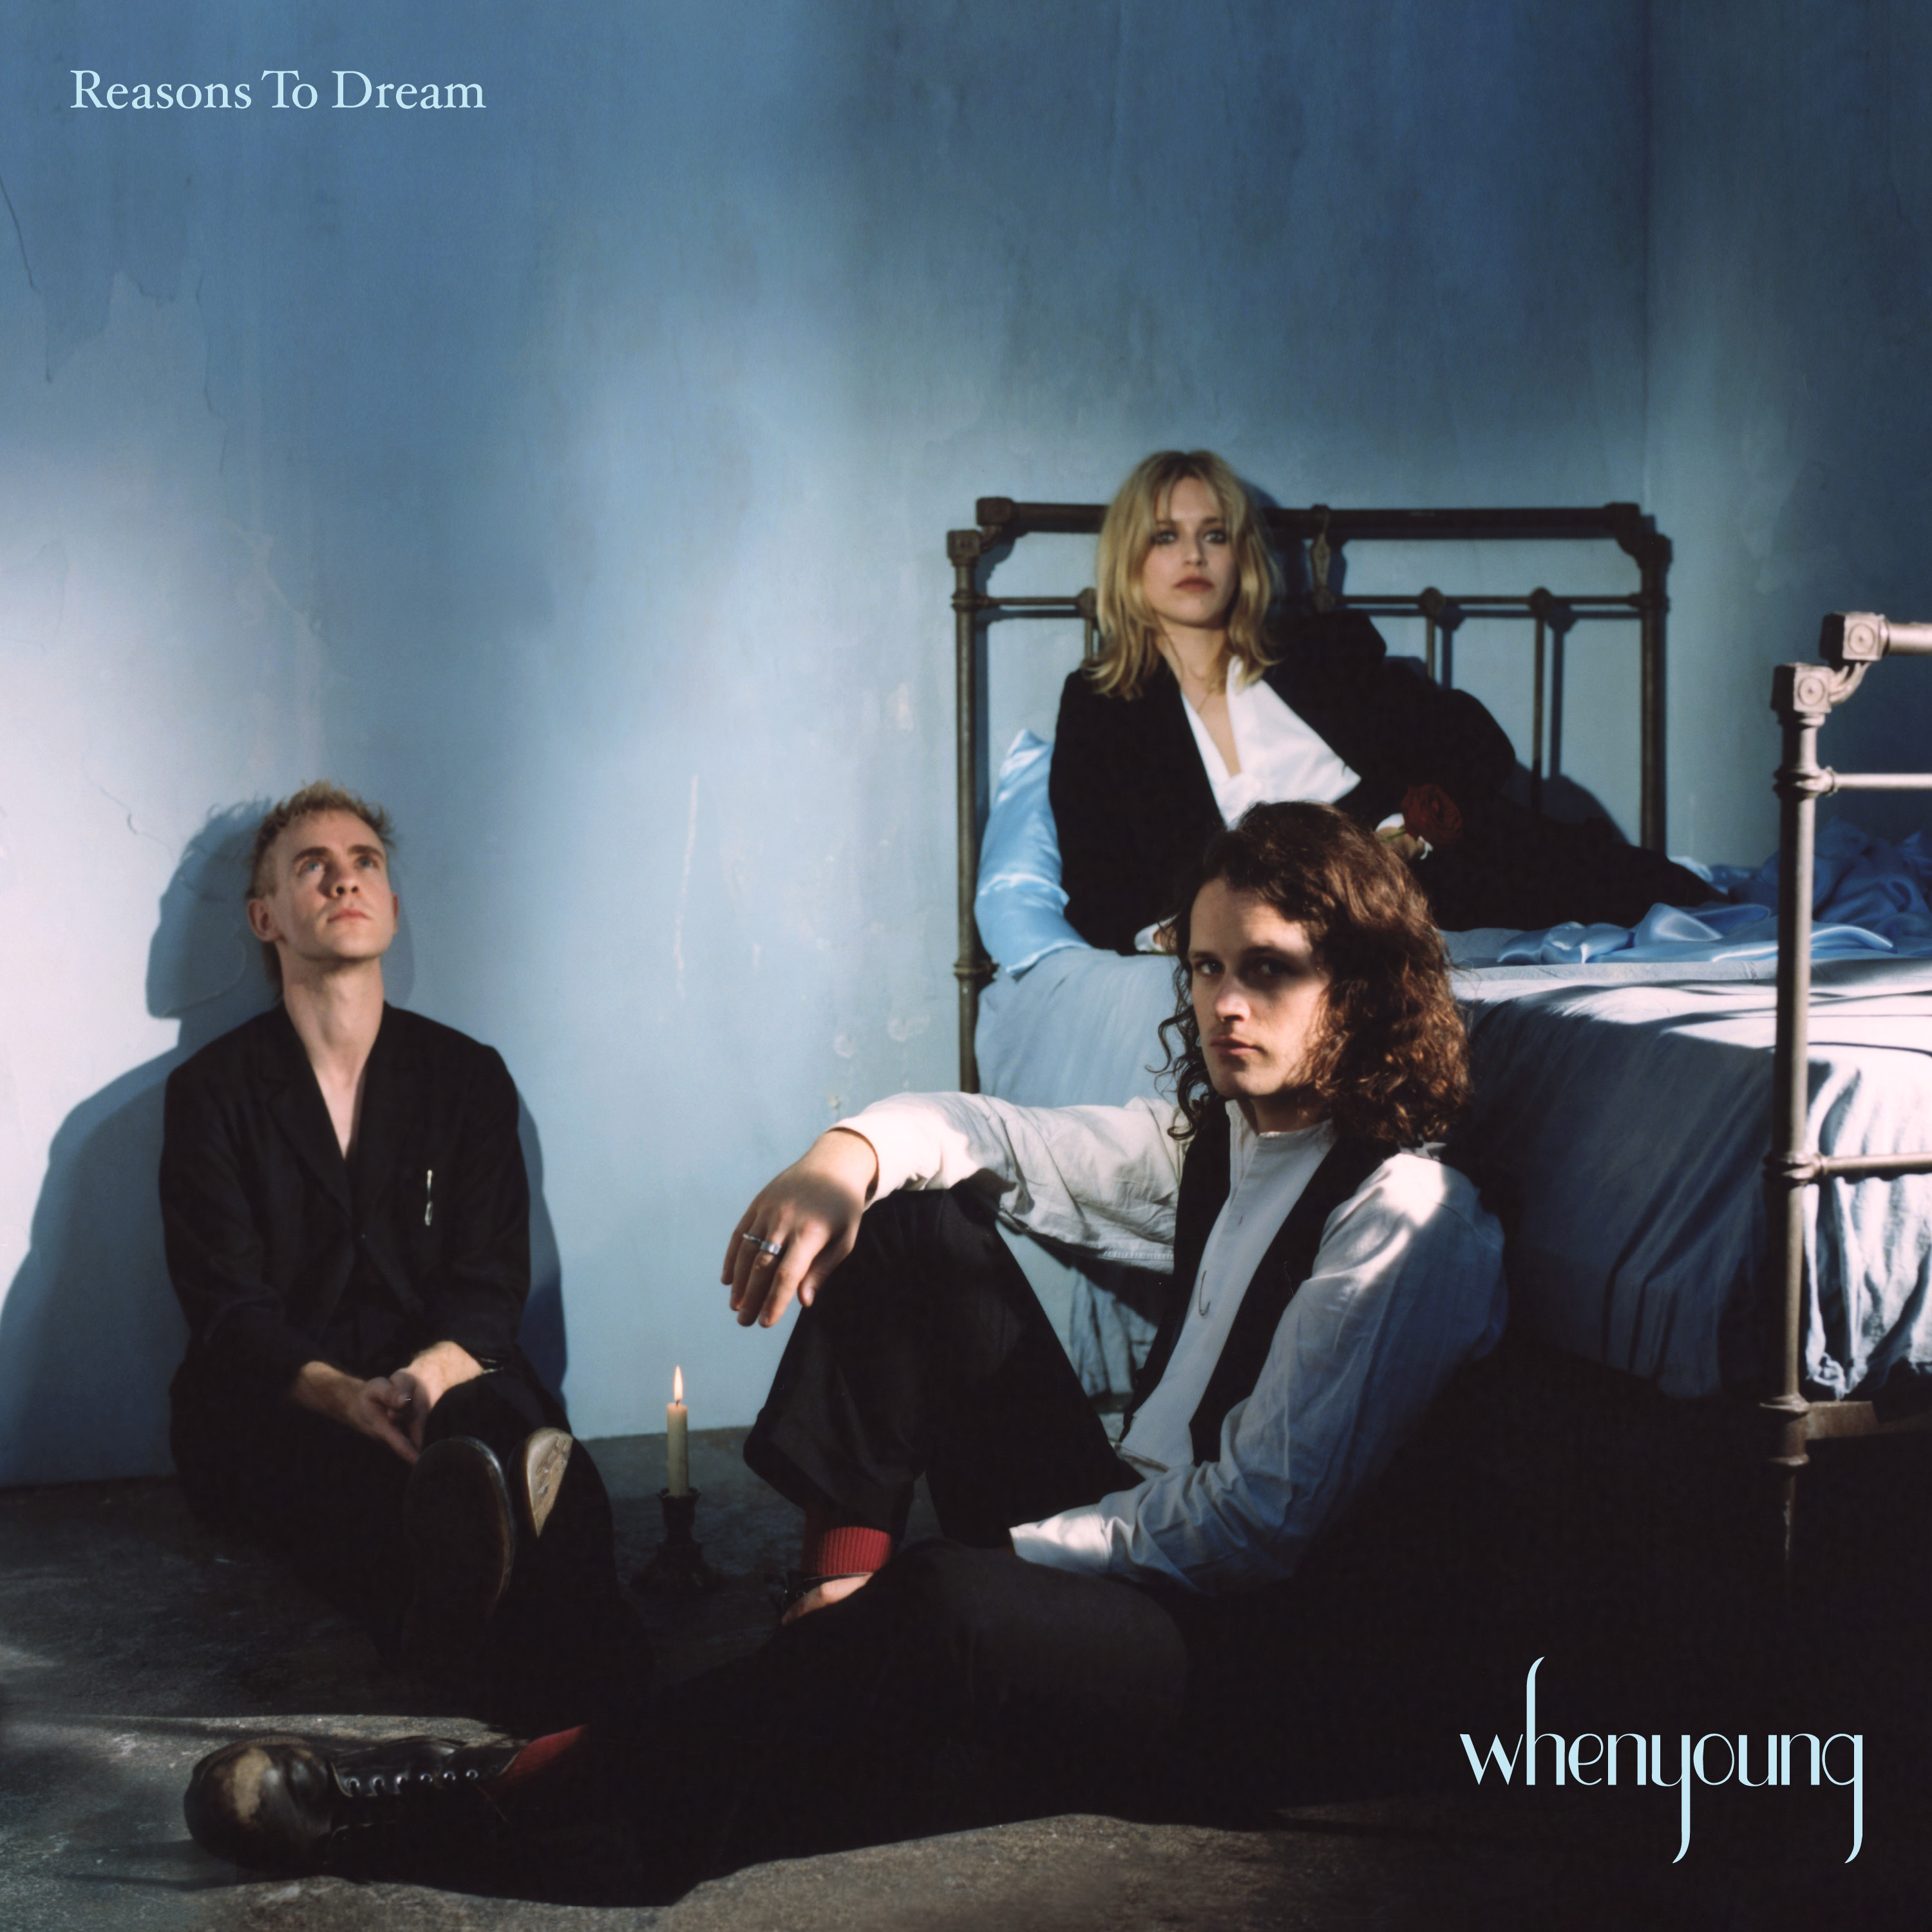  Album Review: Whenyoung – Reasons To Dream